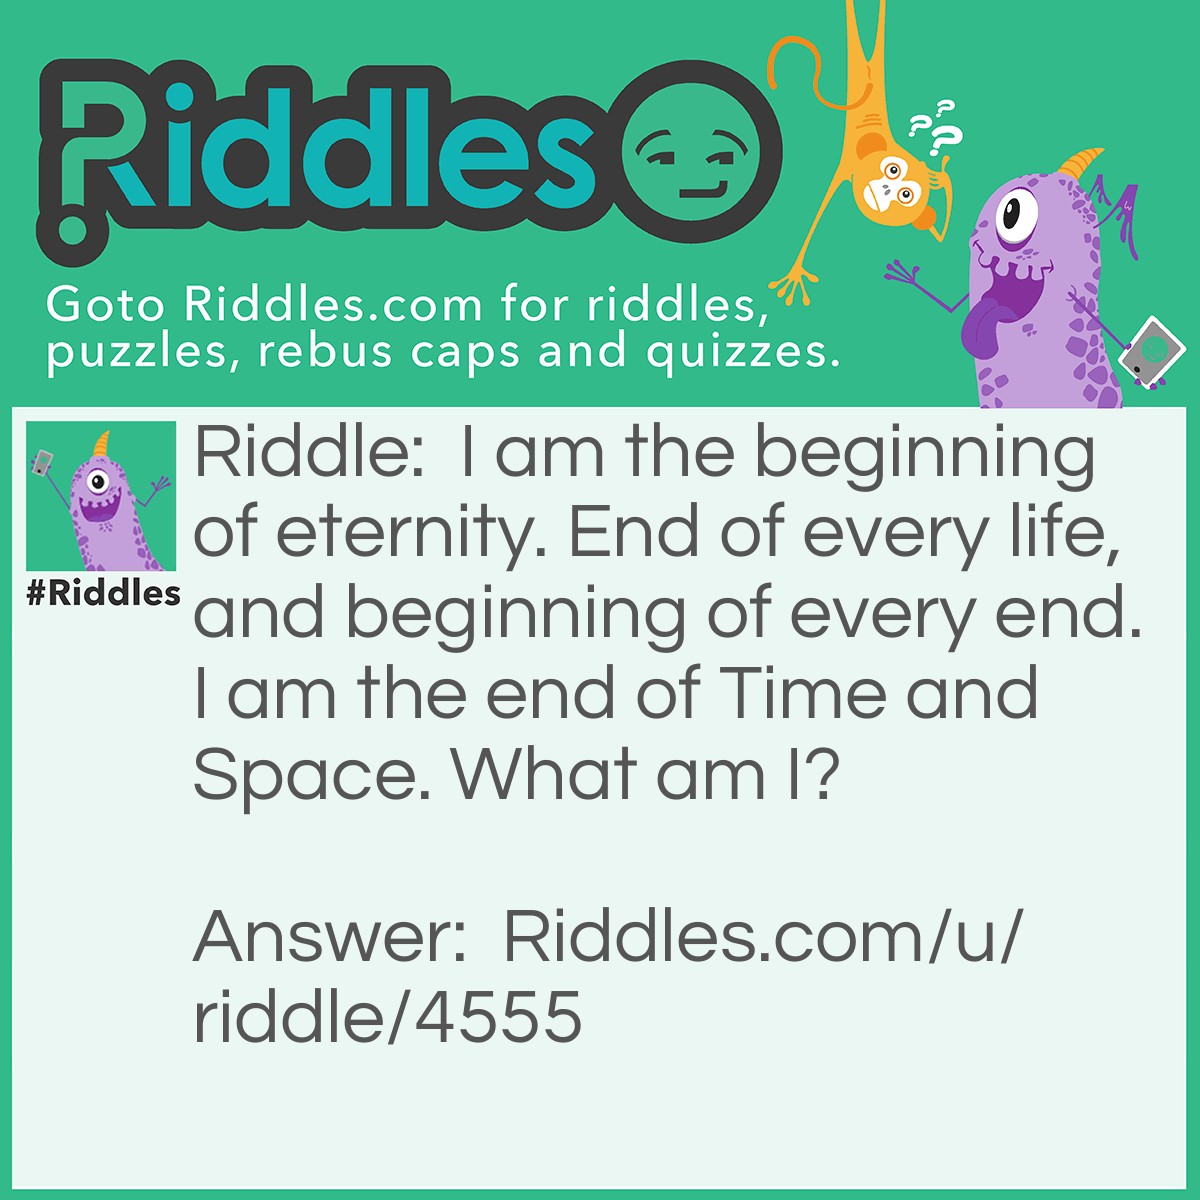 Riddle: I am the beginning of eternity. End of every life, and beginning of every end. I am the end of Time and Space. What am I? Answer: Look at the title, silly goose.